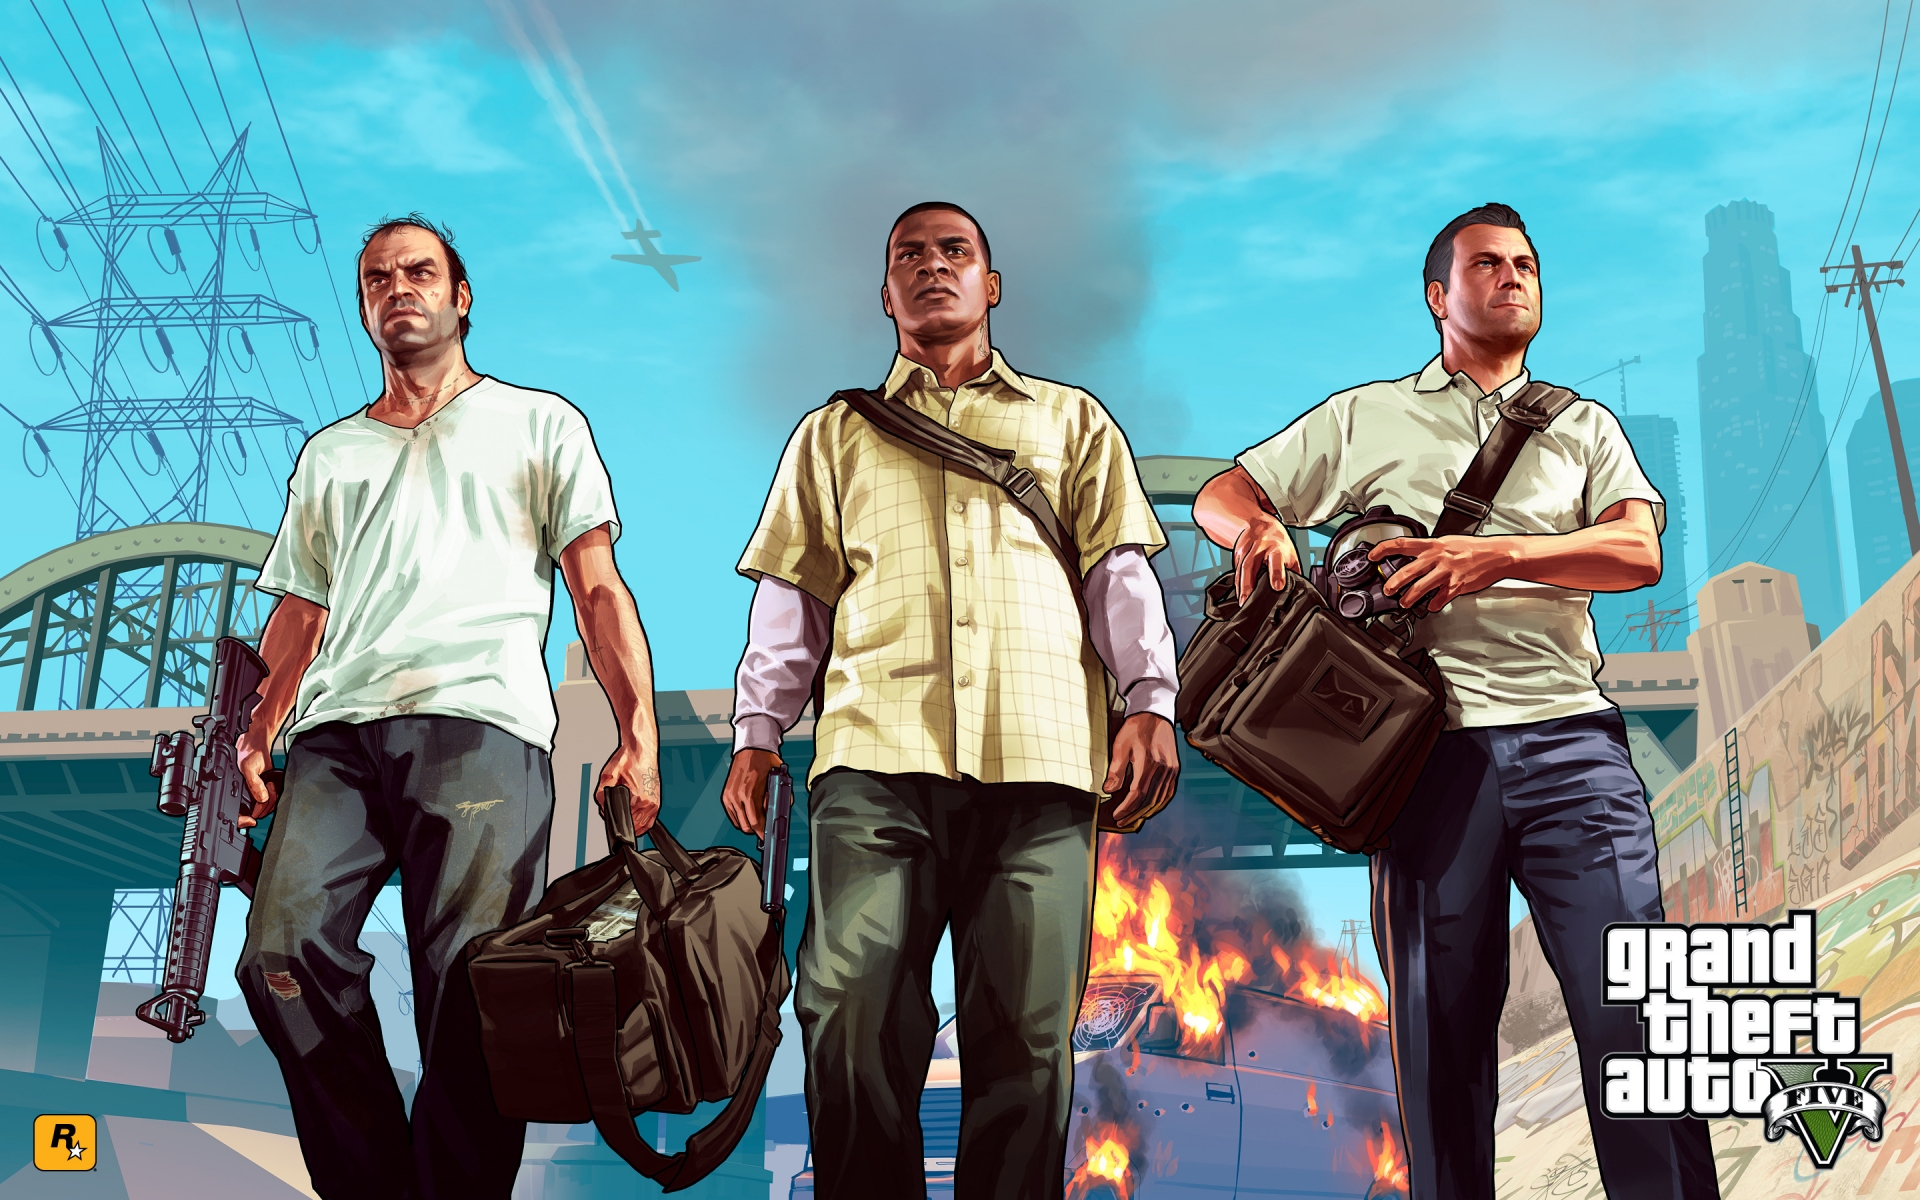 Gta 5 Main Characters for 1920 x 1200 widescreen resolution